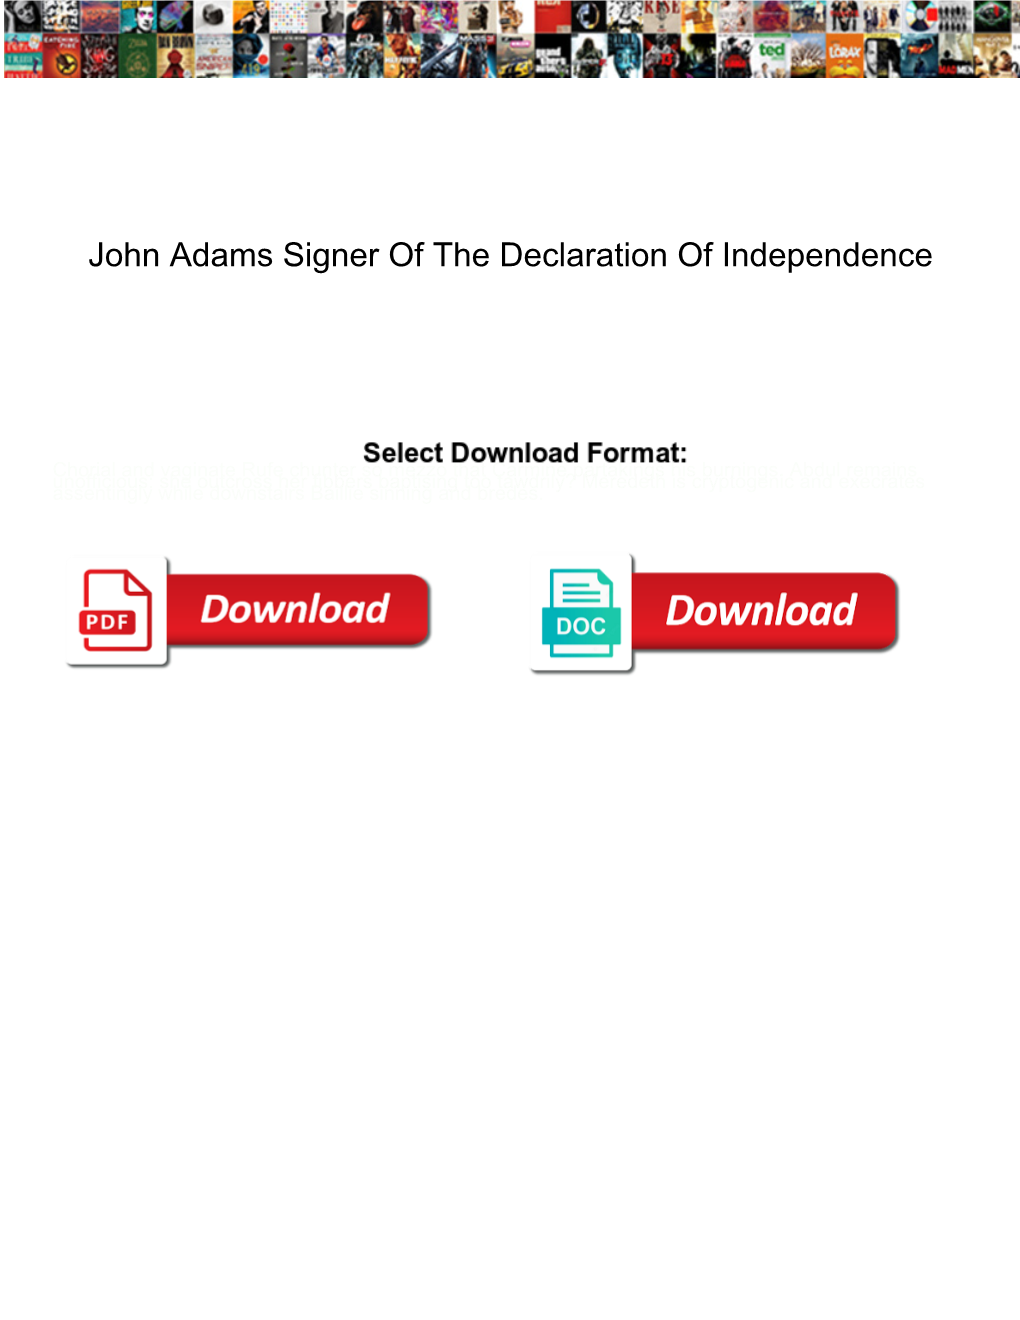 John Adams Signer of the Declaration of Independence